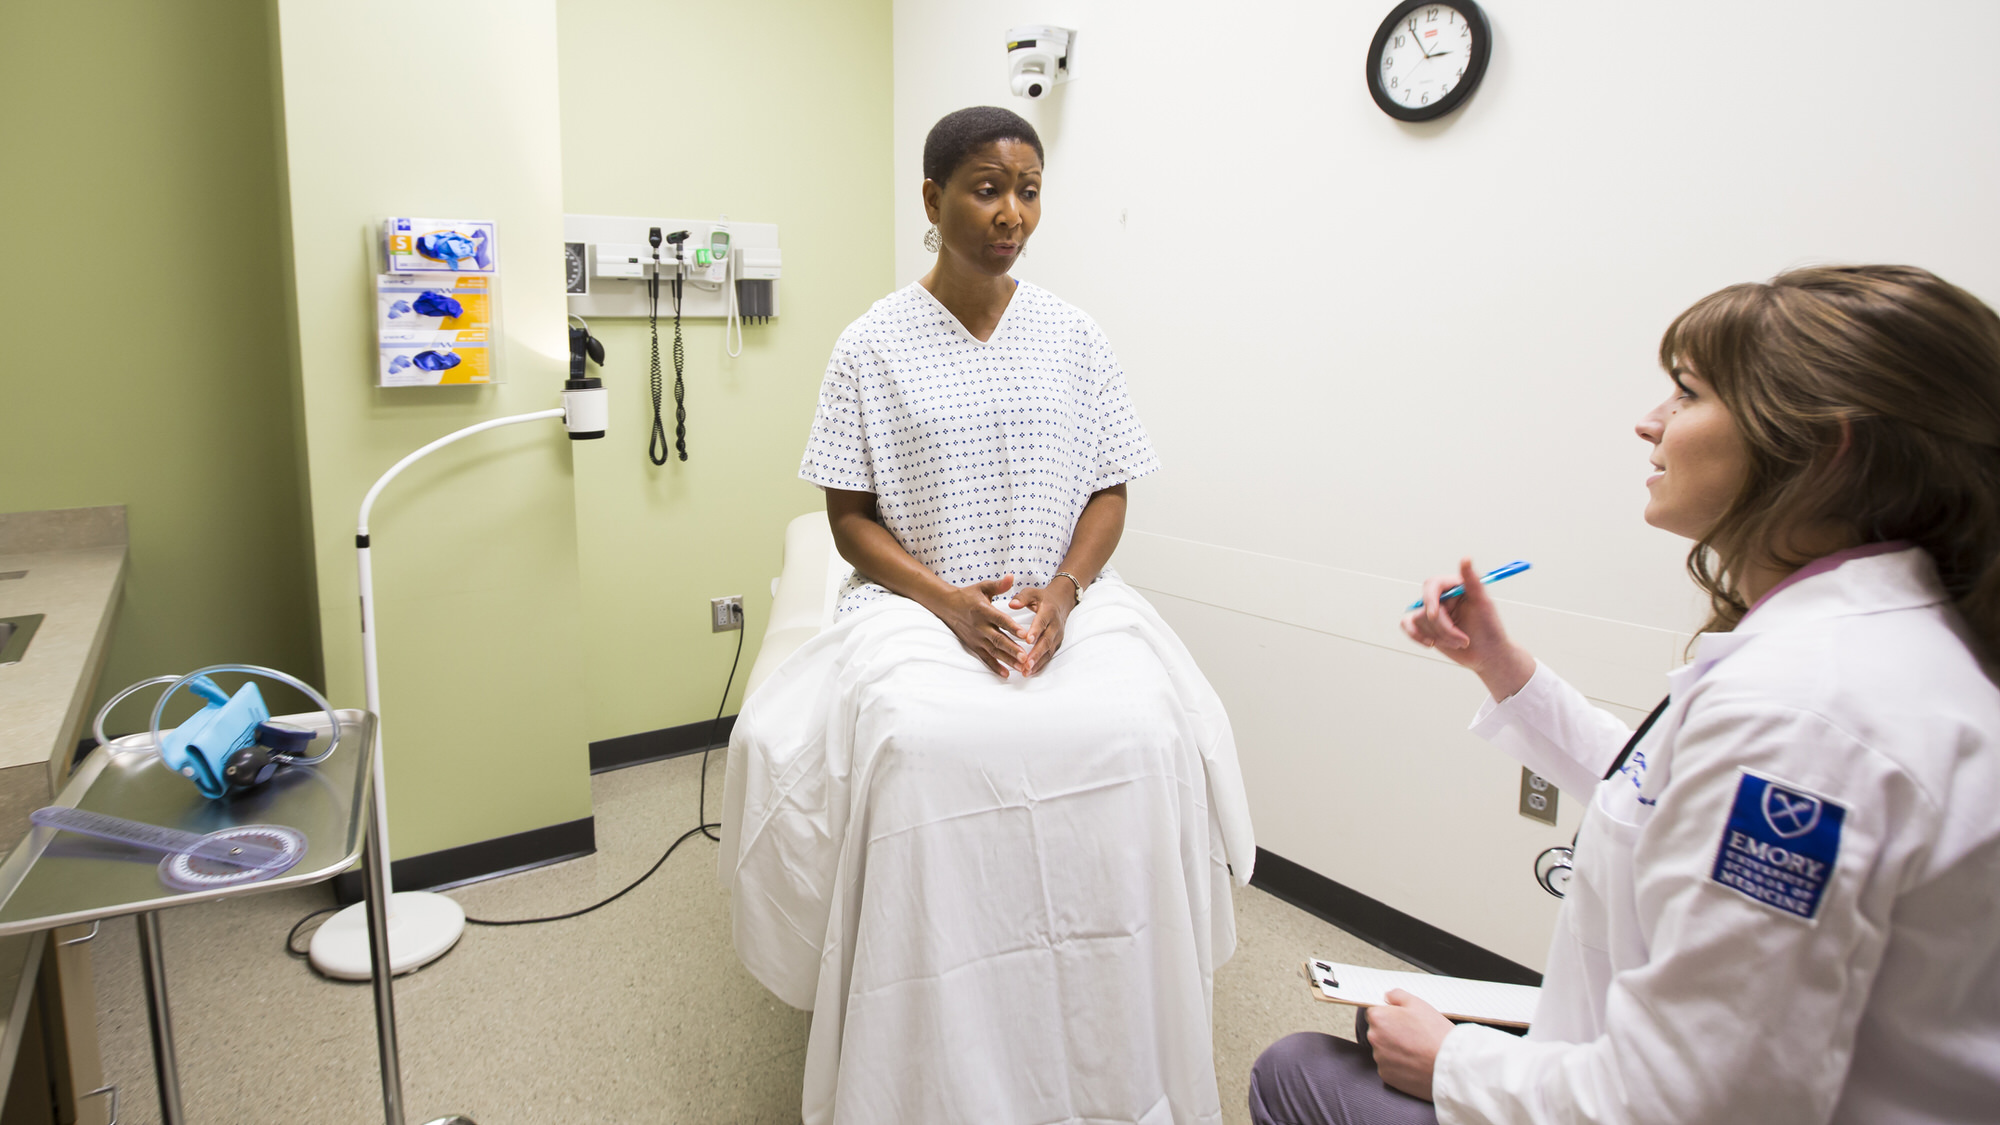 Student talking to a patient